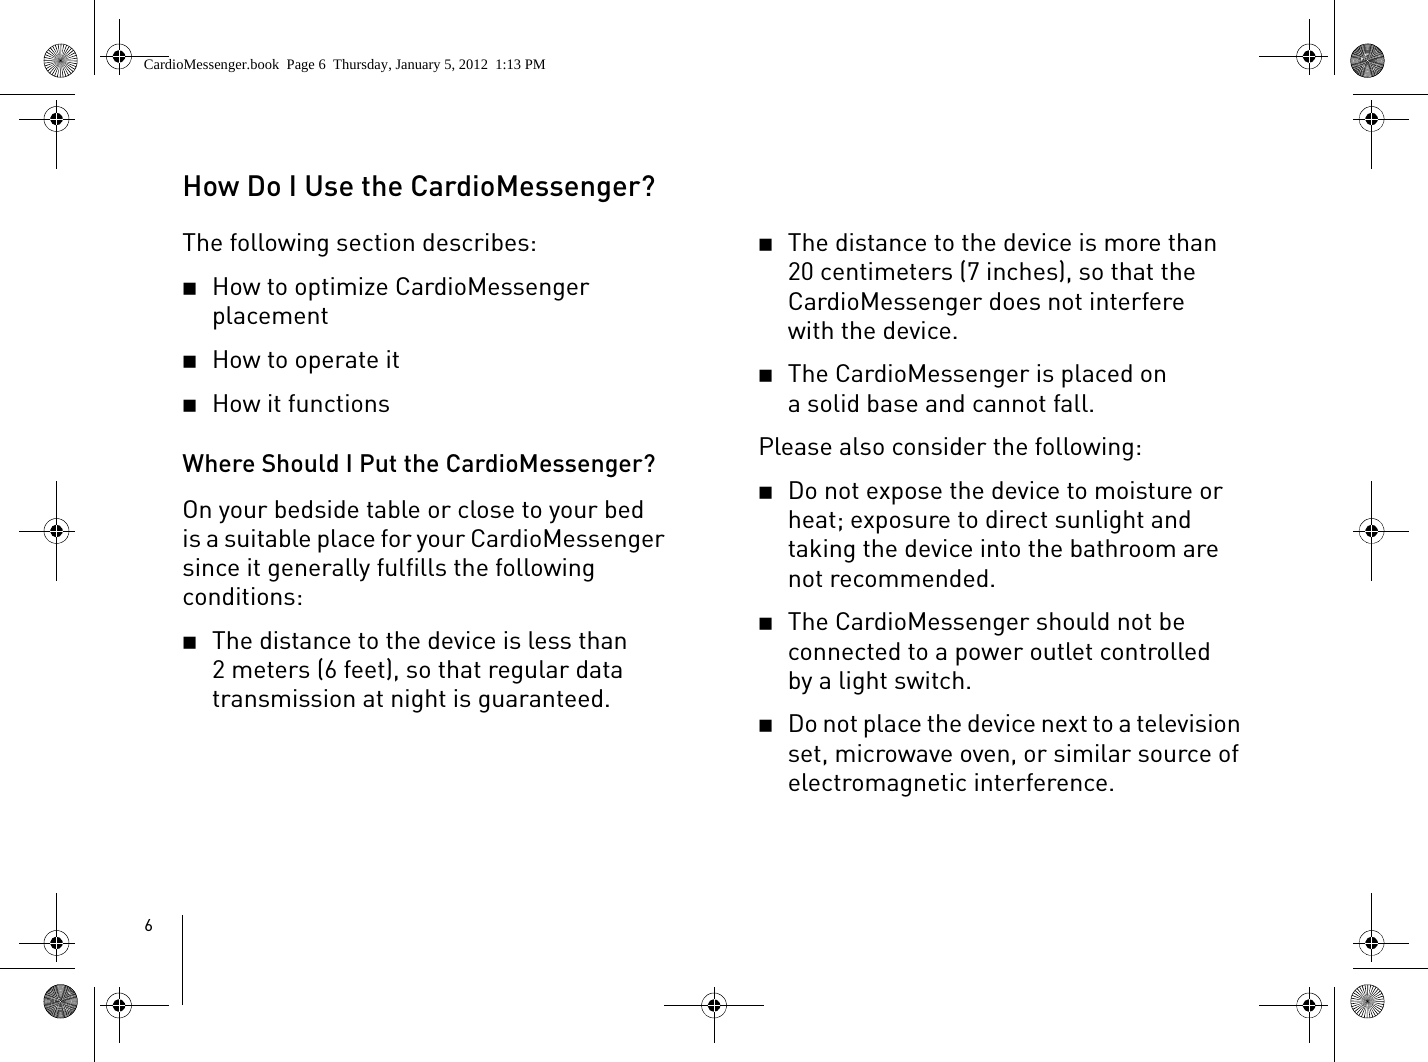 6How Do I Use the CardioMessenger?The following section describes: 2How to optimize CardioMessenger placement2How to operate it2How it functions Where Should I Put the CardioMessenger?On your bedside table or close to your bed is a suitable place for your CardioMessenger since it generally fulfills the following conditions:2The distance to the device is less than 2 meters (6 feet), so that regular data transmission at night is guaranteed.2The distance to the device is more than 20 centimeters (7 inches), so that the CardioMessenger does not interfere with the device.2The CardioMessenger is placed on a solid base and cannot fall. Please also consider the following:2Do not expose the device to moisture or heat; exposure to direct sunlight and taking the device into the bathroom are not recommended.2The CardioMessenger should not be connected to a power outlet controlled by a light switch. 2Do not place the device next to a television set, microwave oven, or similar source of electromagnetic interference.CardioMessenger.book  Page 6  Thursday, January 5, 2012  1:13 PM